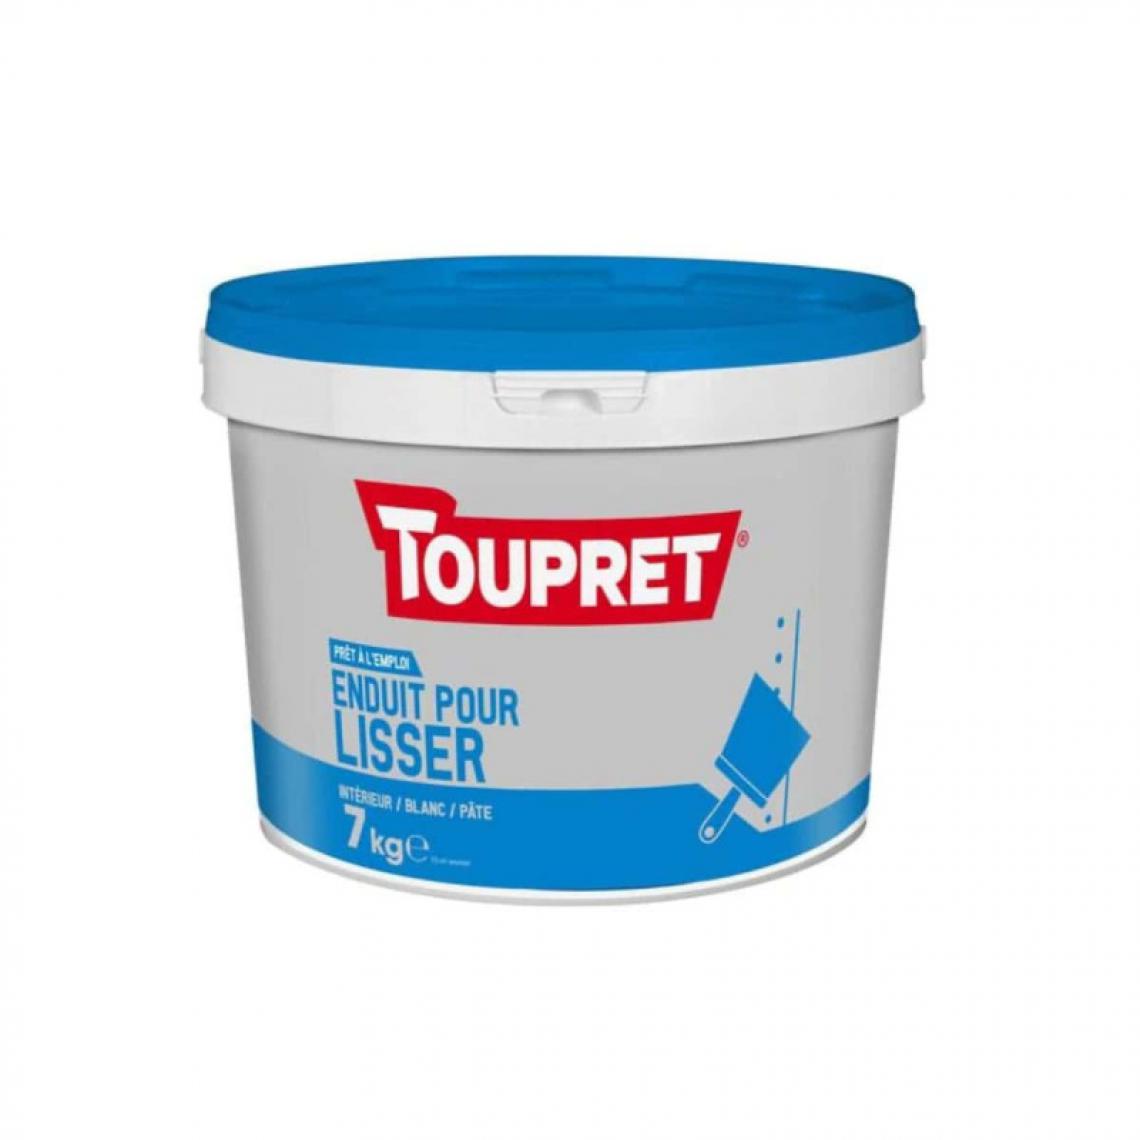 Toupret - Extra Liss TOUPRET Pate Tube 7Kg - BCLIP07 - Mastic, silicone, joint